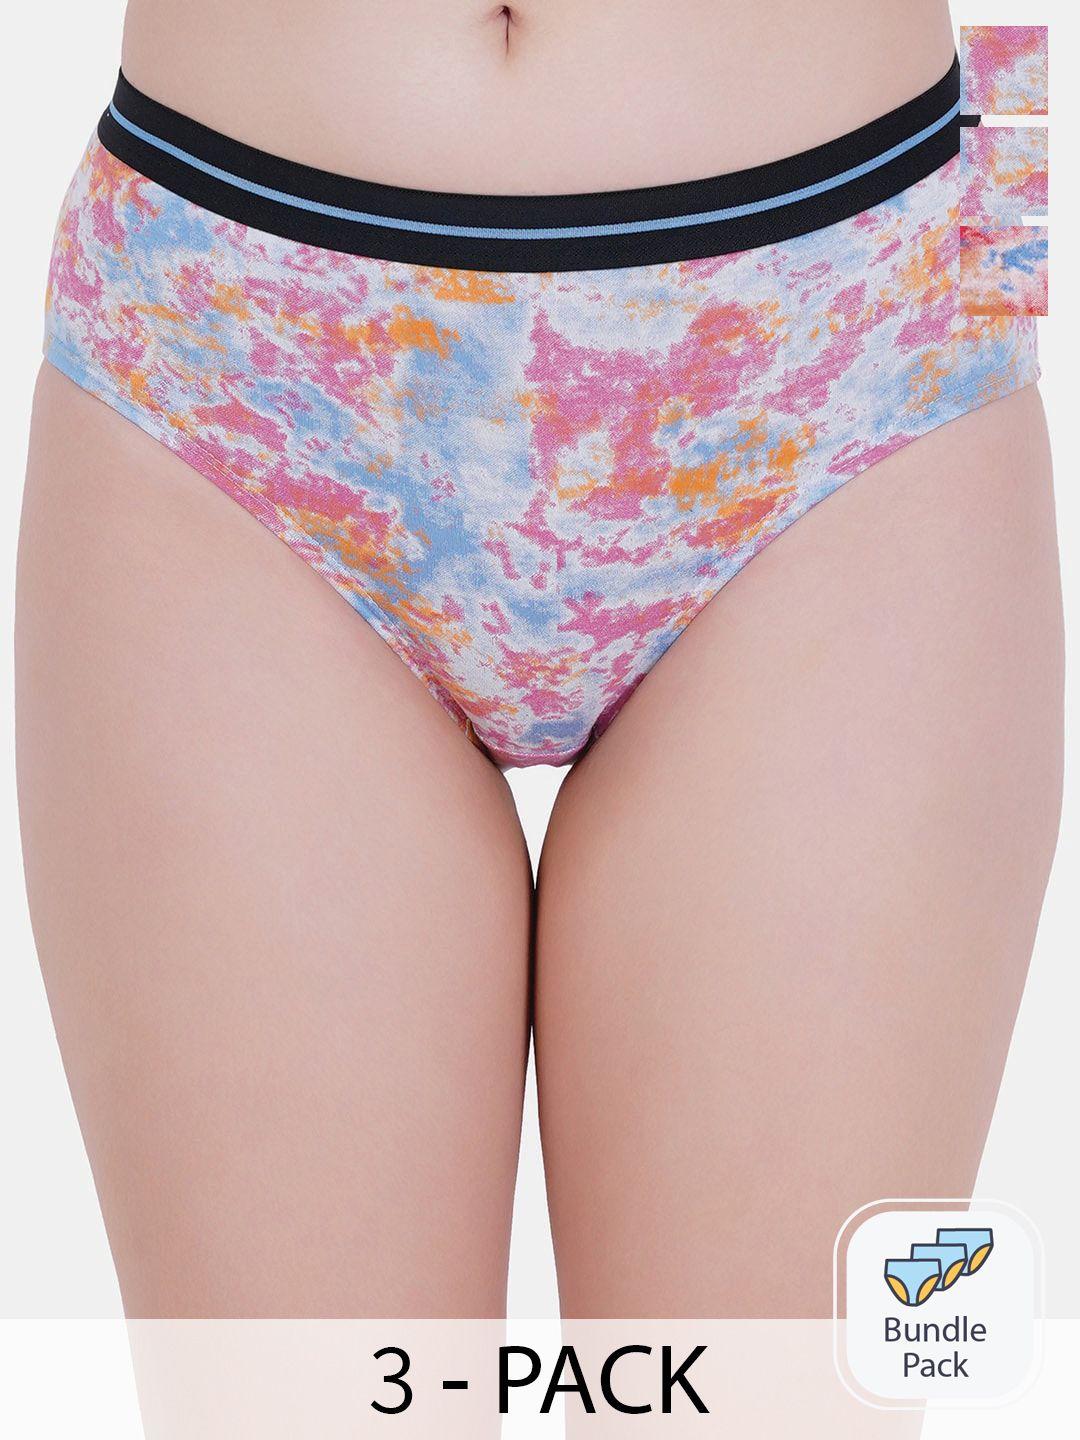 reveira pack of 3 assorted abstract printed hipster briefs